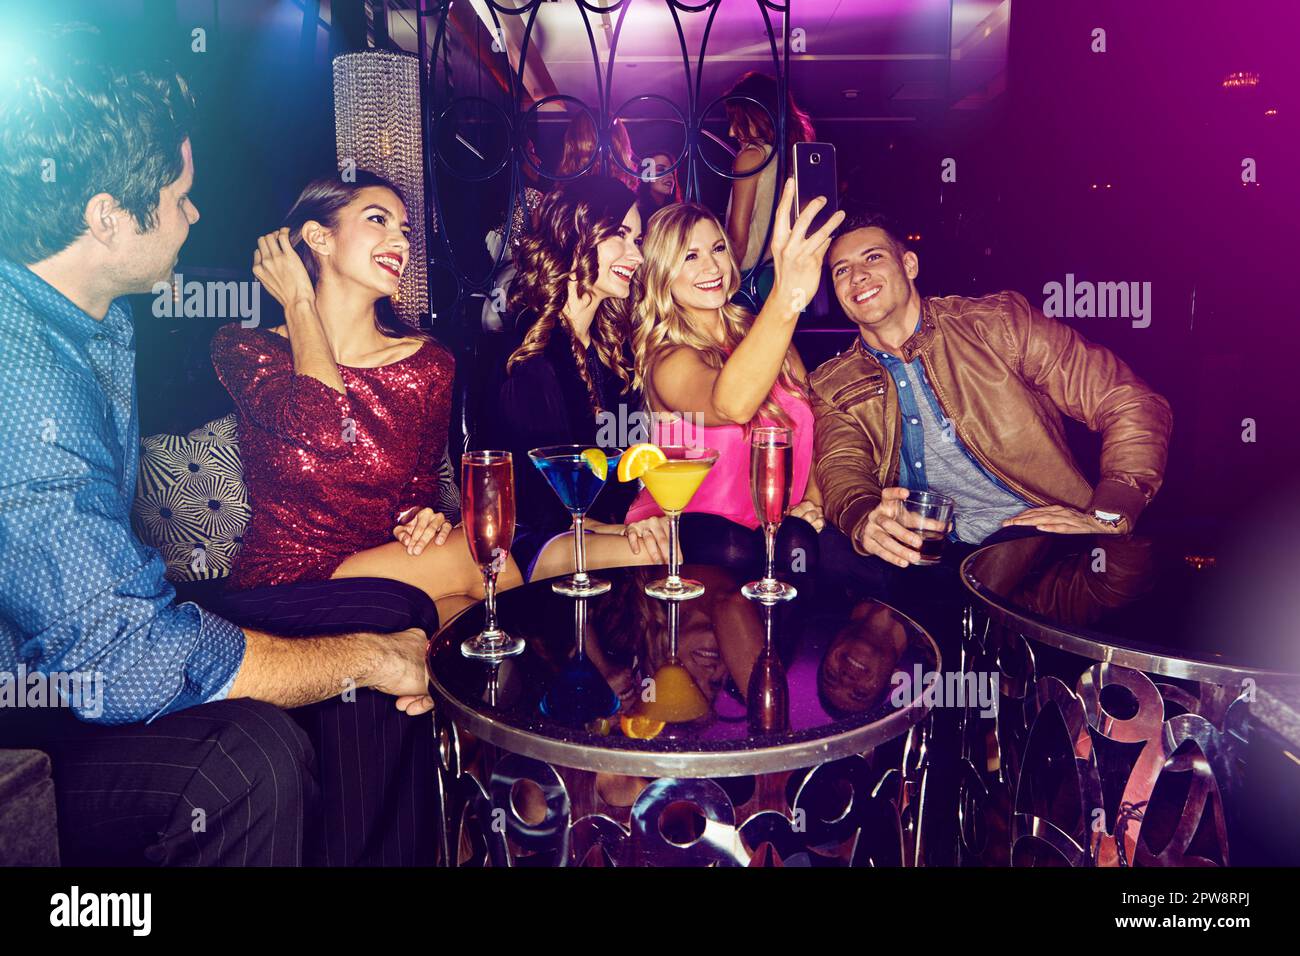 Smartphone Obsession At Night Club Party Stock Photo, Picture and Royalty  Free Image. Image 78105137.